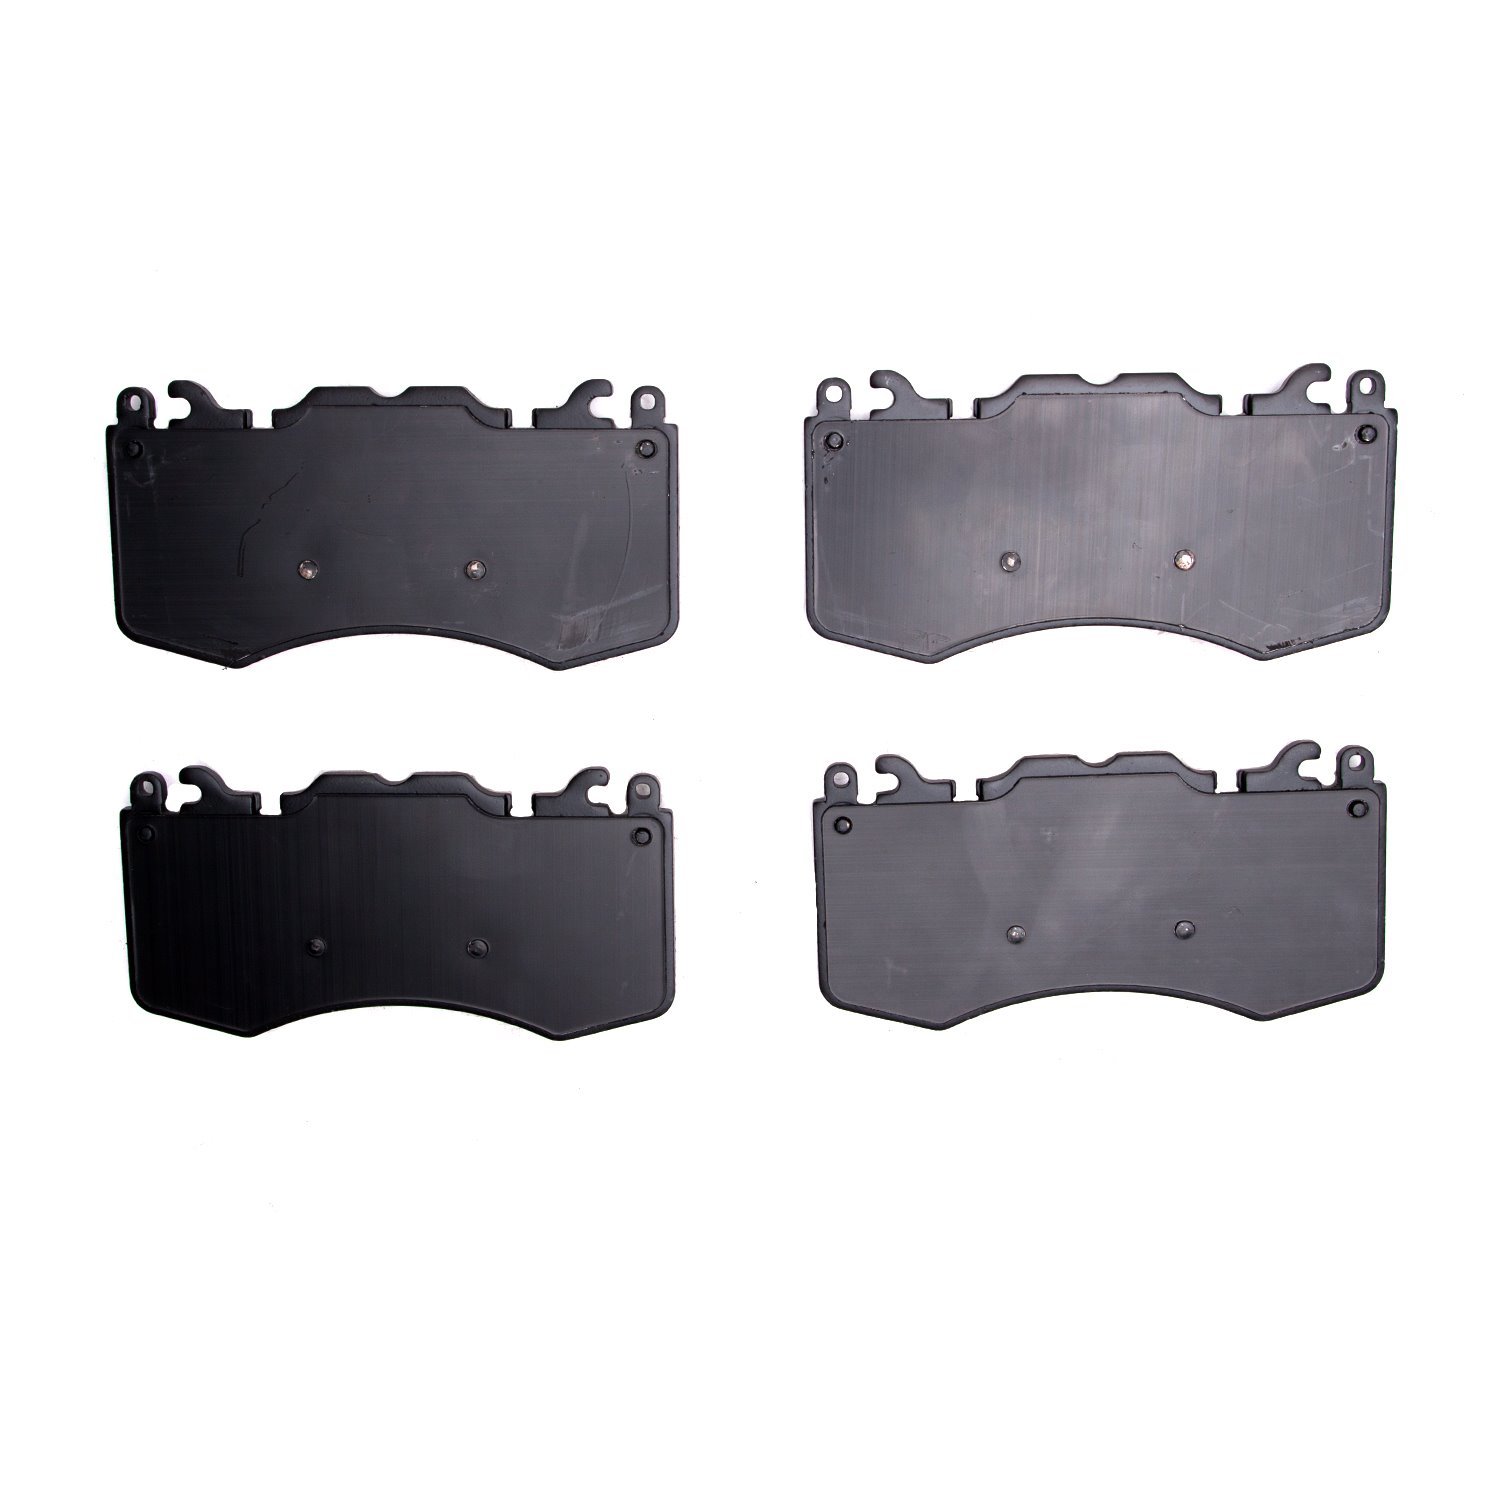 1310-1426-00 3000-Series Ceramic Brake Pads, Fits Select Land Rover, Position: Front